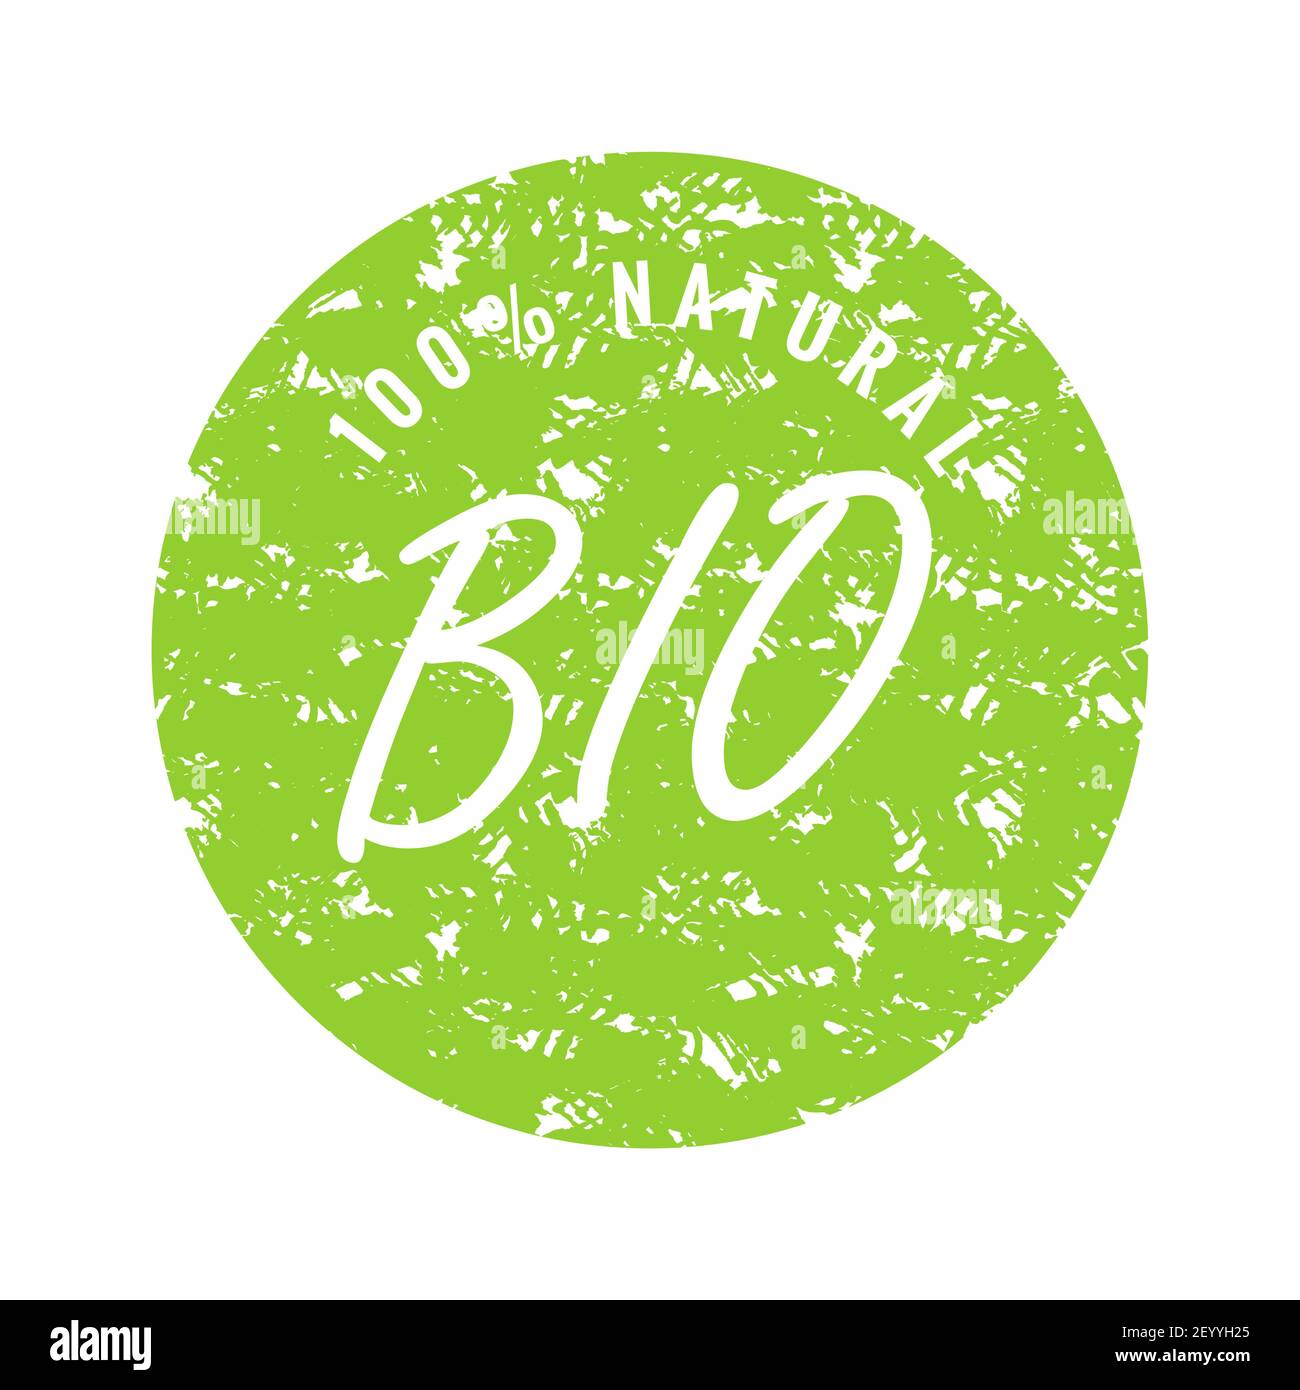 Bio natural product, label rubber stamp green. Icon stamp product, green label eco, organic sticker healthy. Vector illustration Stock Vector